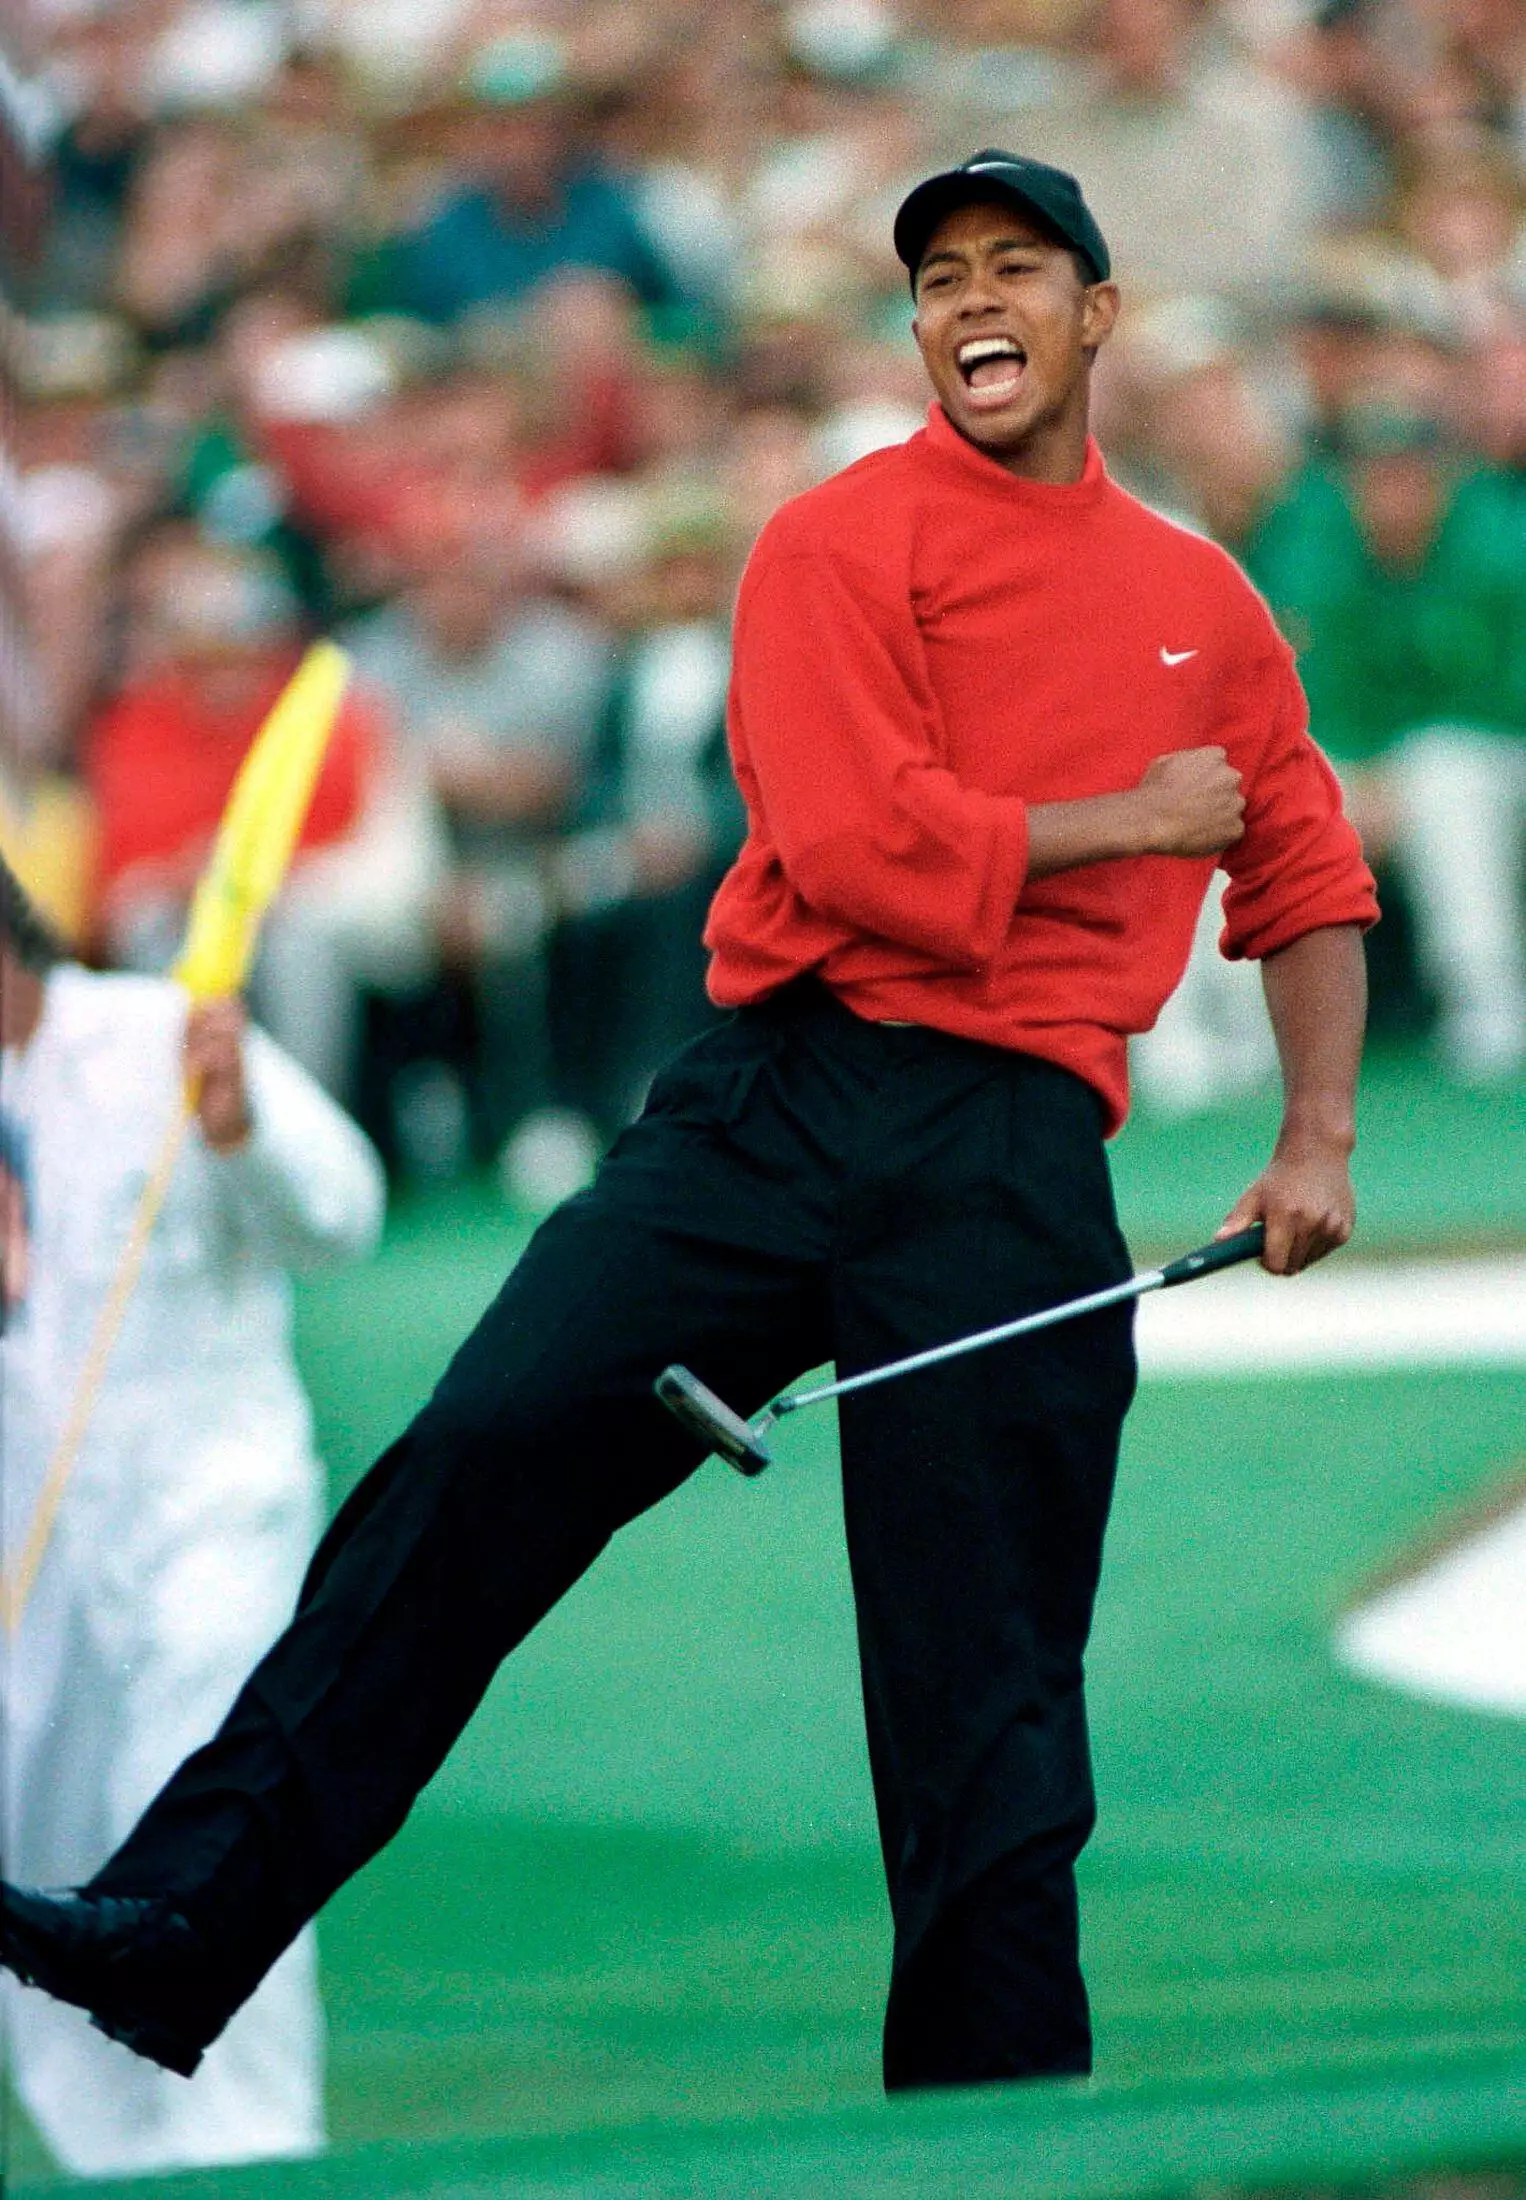 Tiger Woods first won the Masters 25 years ago, back in 1997.